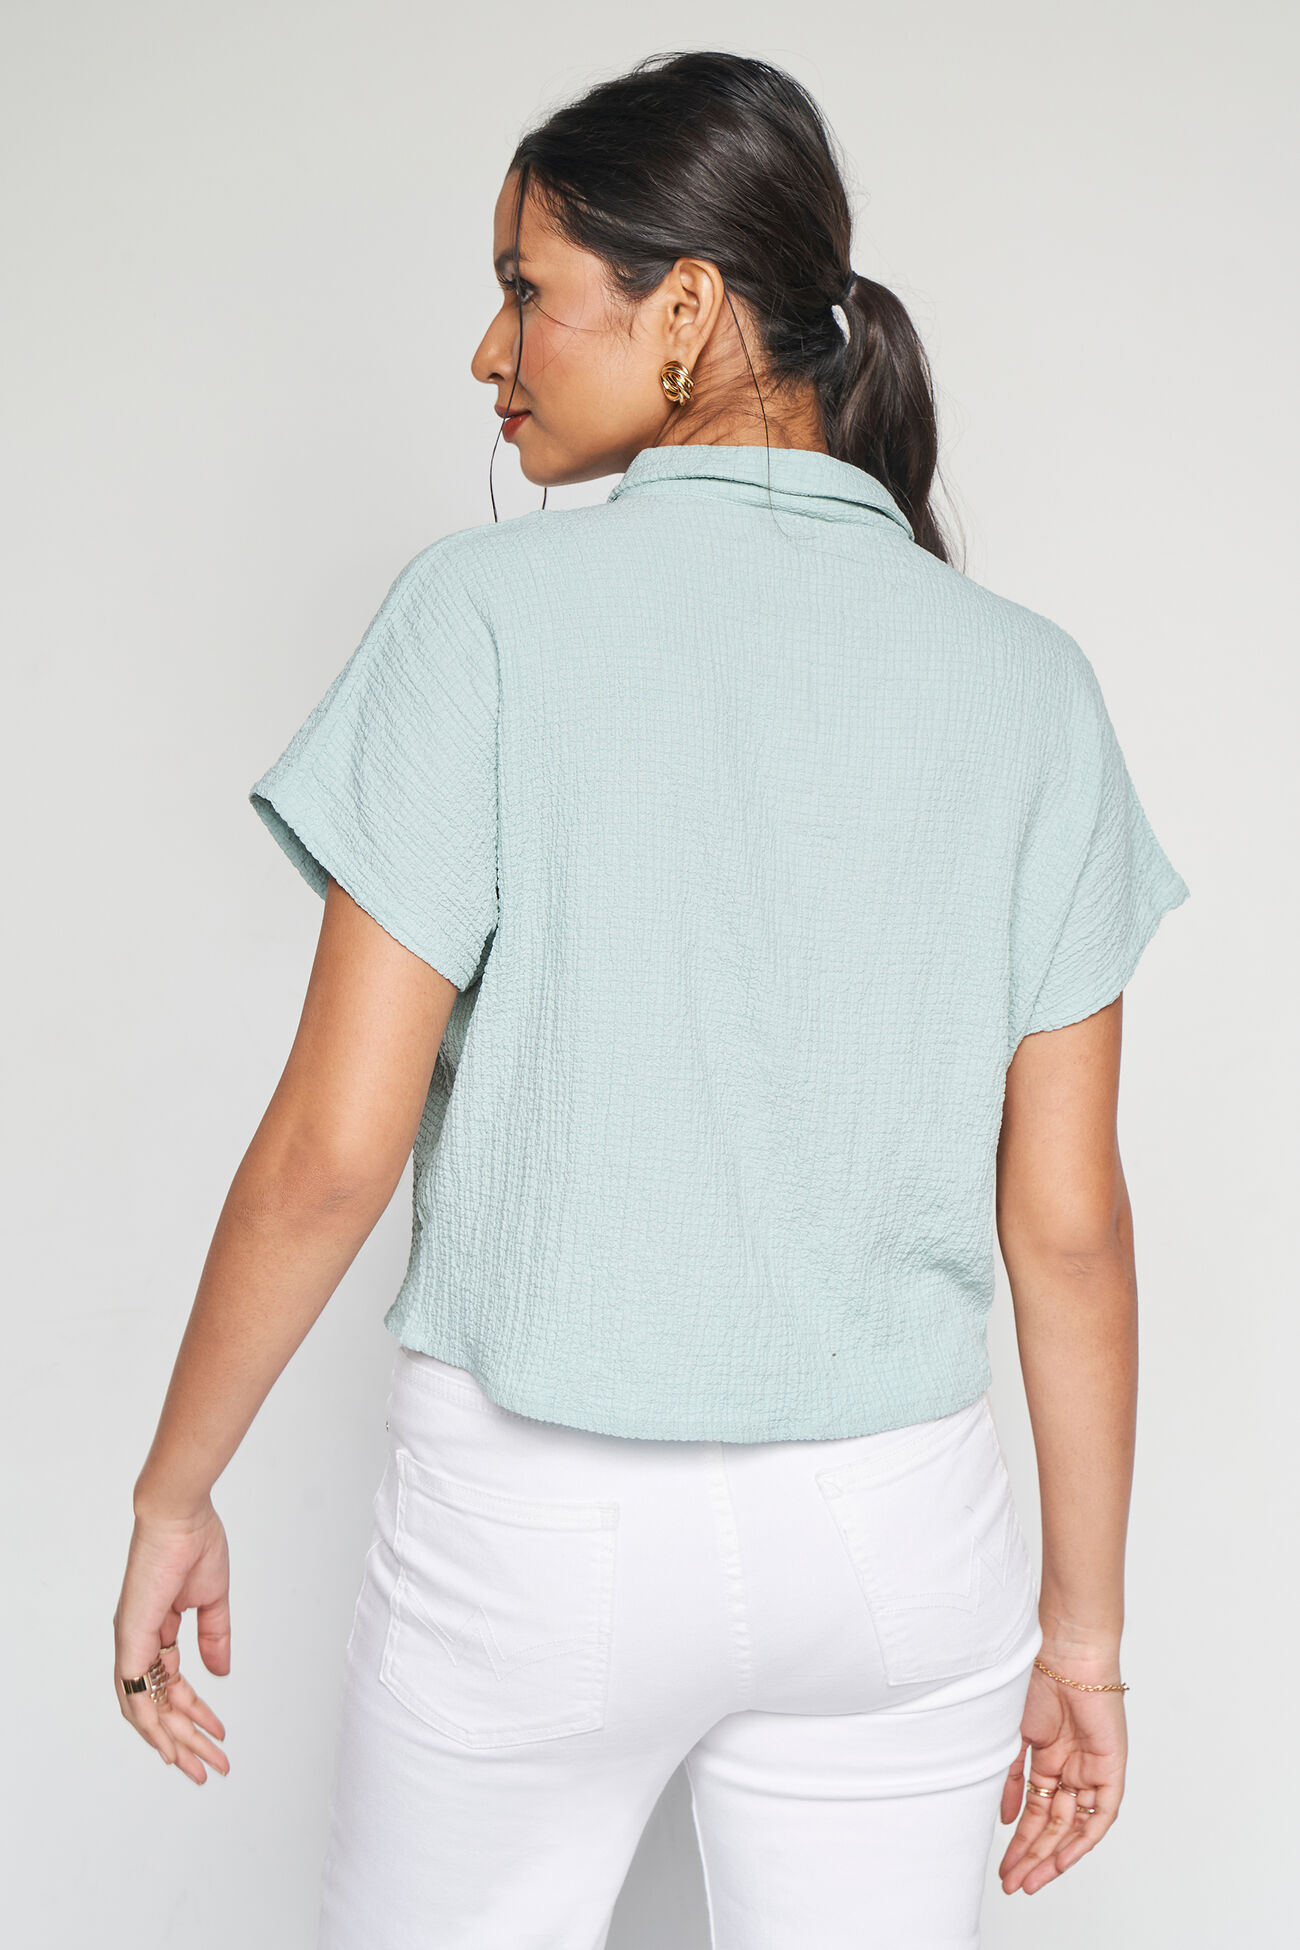 Everyday Essential Shirt, Mint, image 4